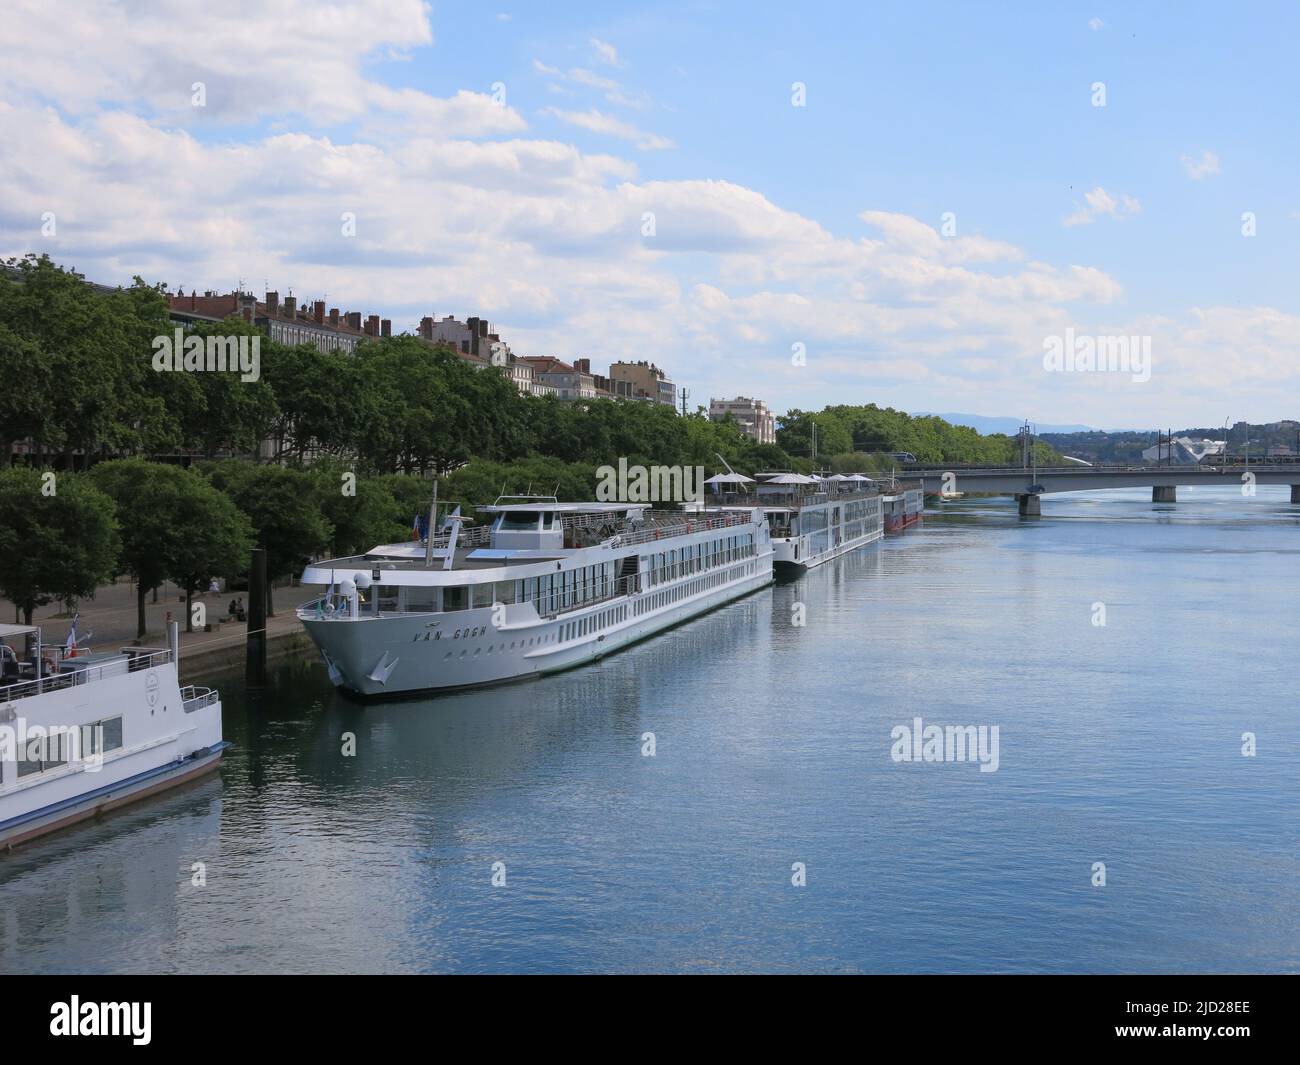 River cruising in Europe: cruise ships moored alongside the banks of the River Rhone in southern France. Stock Photo